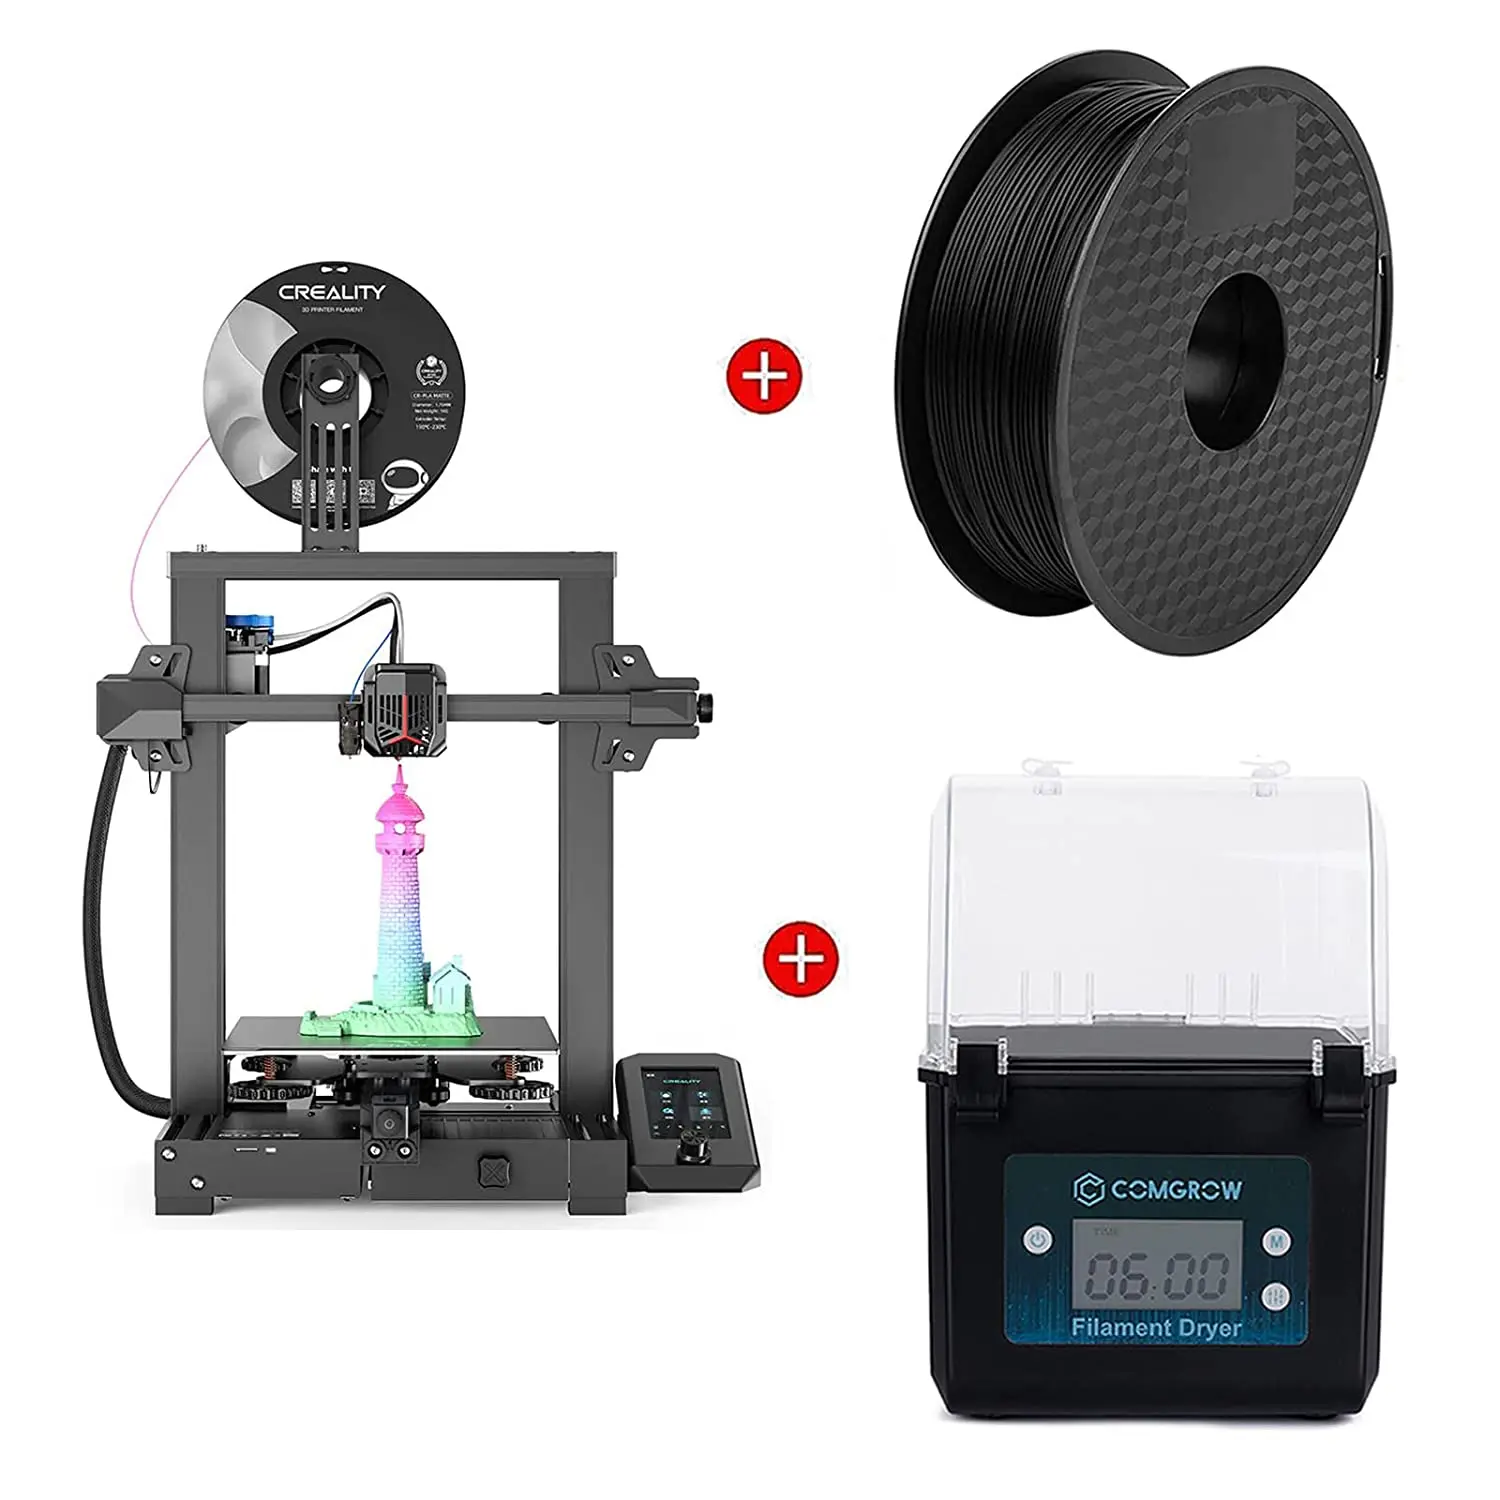 

Clearance Creality Ender 3 V2 Neo 3D Printer with CR Touch Auto Leveling Kit and 3D Printer PLA Filament Black 1.75mm 1KG and